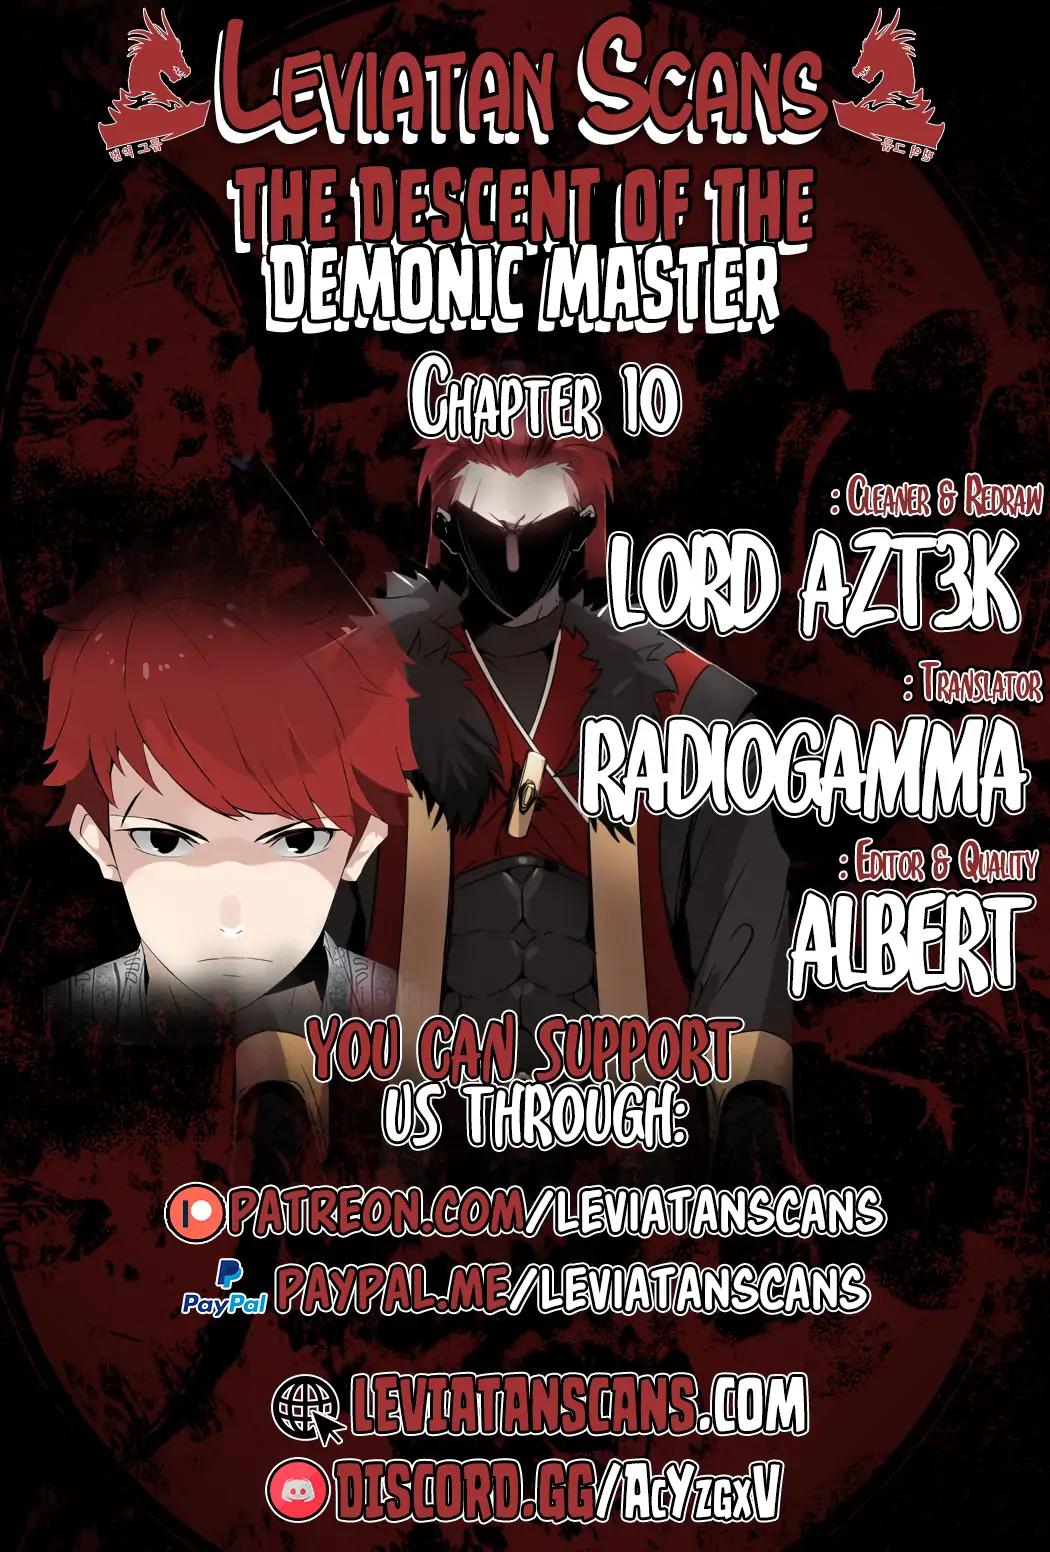 The Descent of the Demonic Master Chapter 10